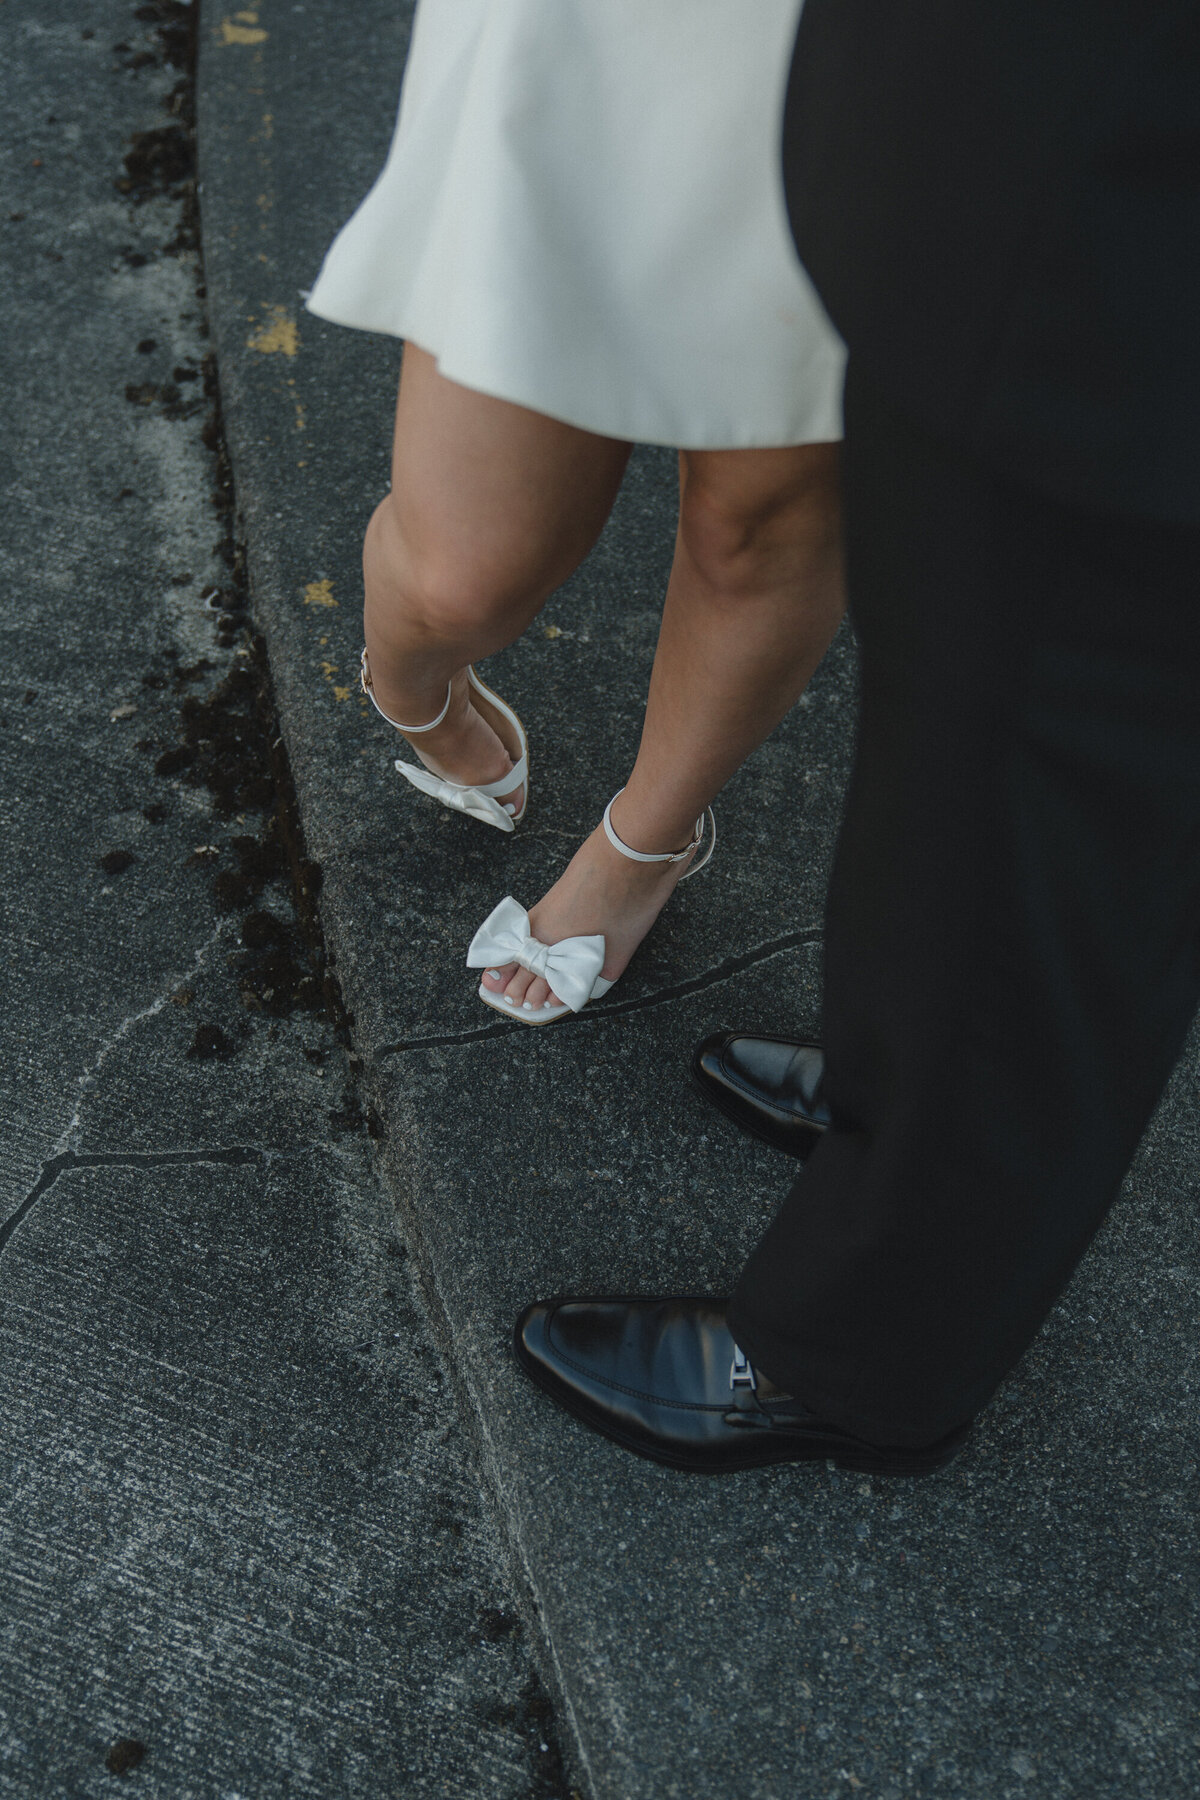 Sara-Canon-Elopement-Downtown-Seattle-WA-Amy-Law-Photography-77